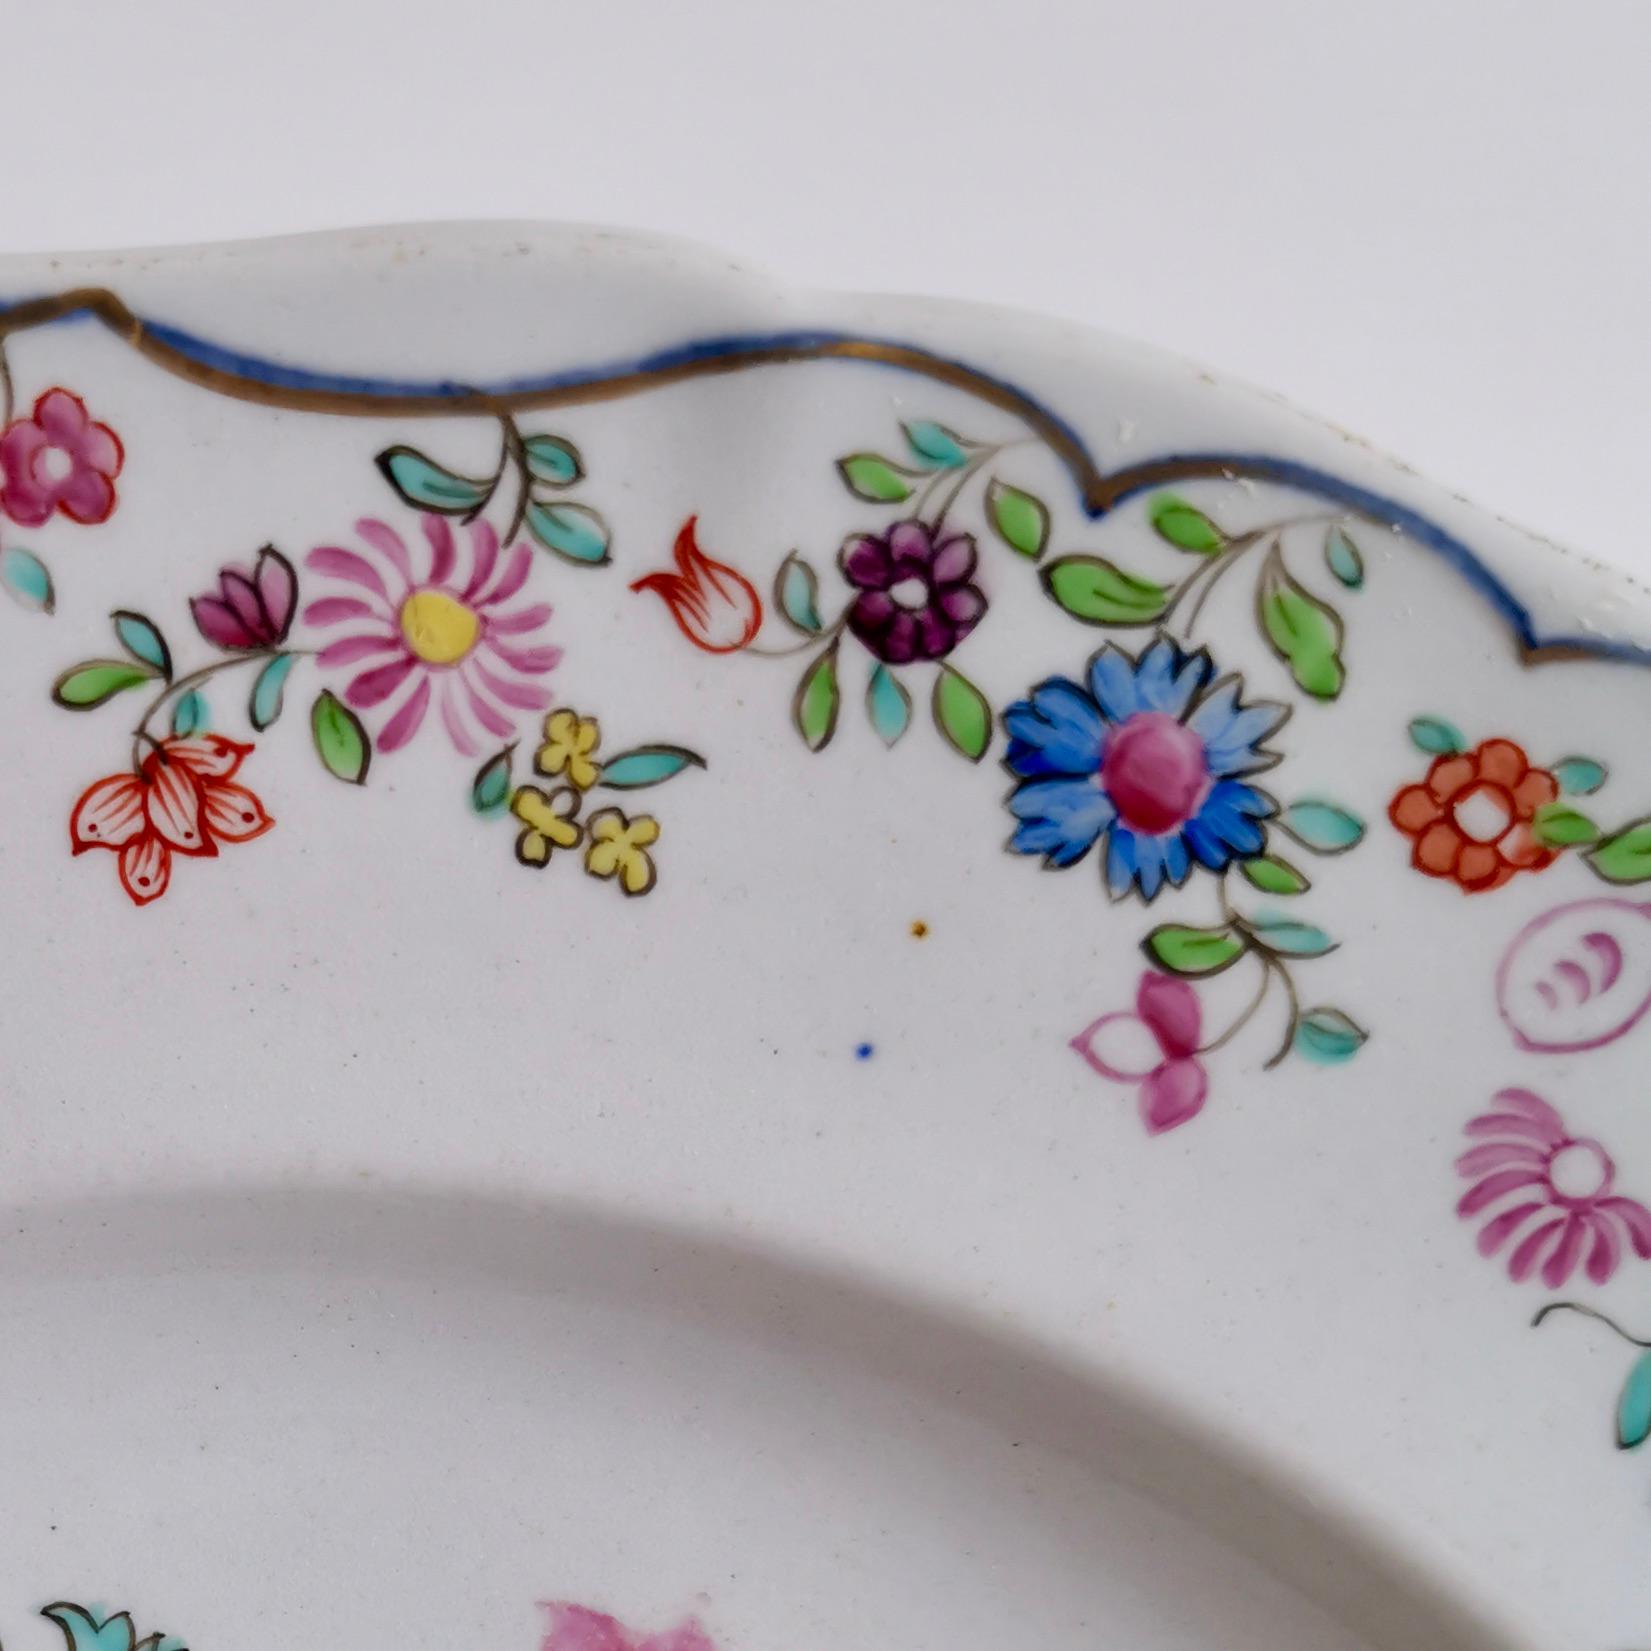 Chinoiserie Spode Stone China Plate, Polychrome Tobacco Leaf Pattern, 1805-1813